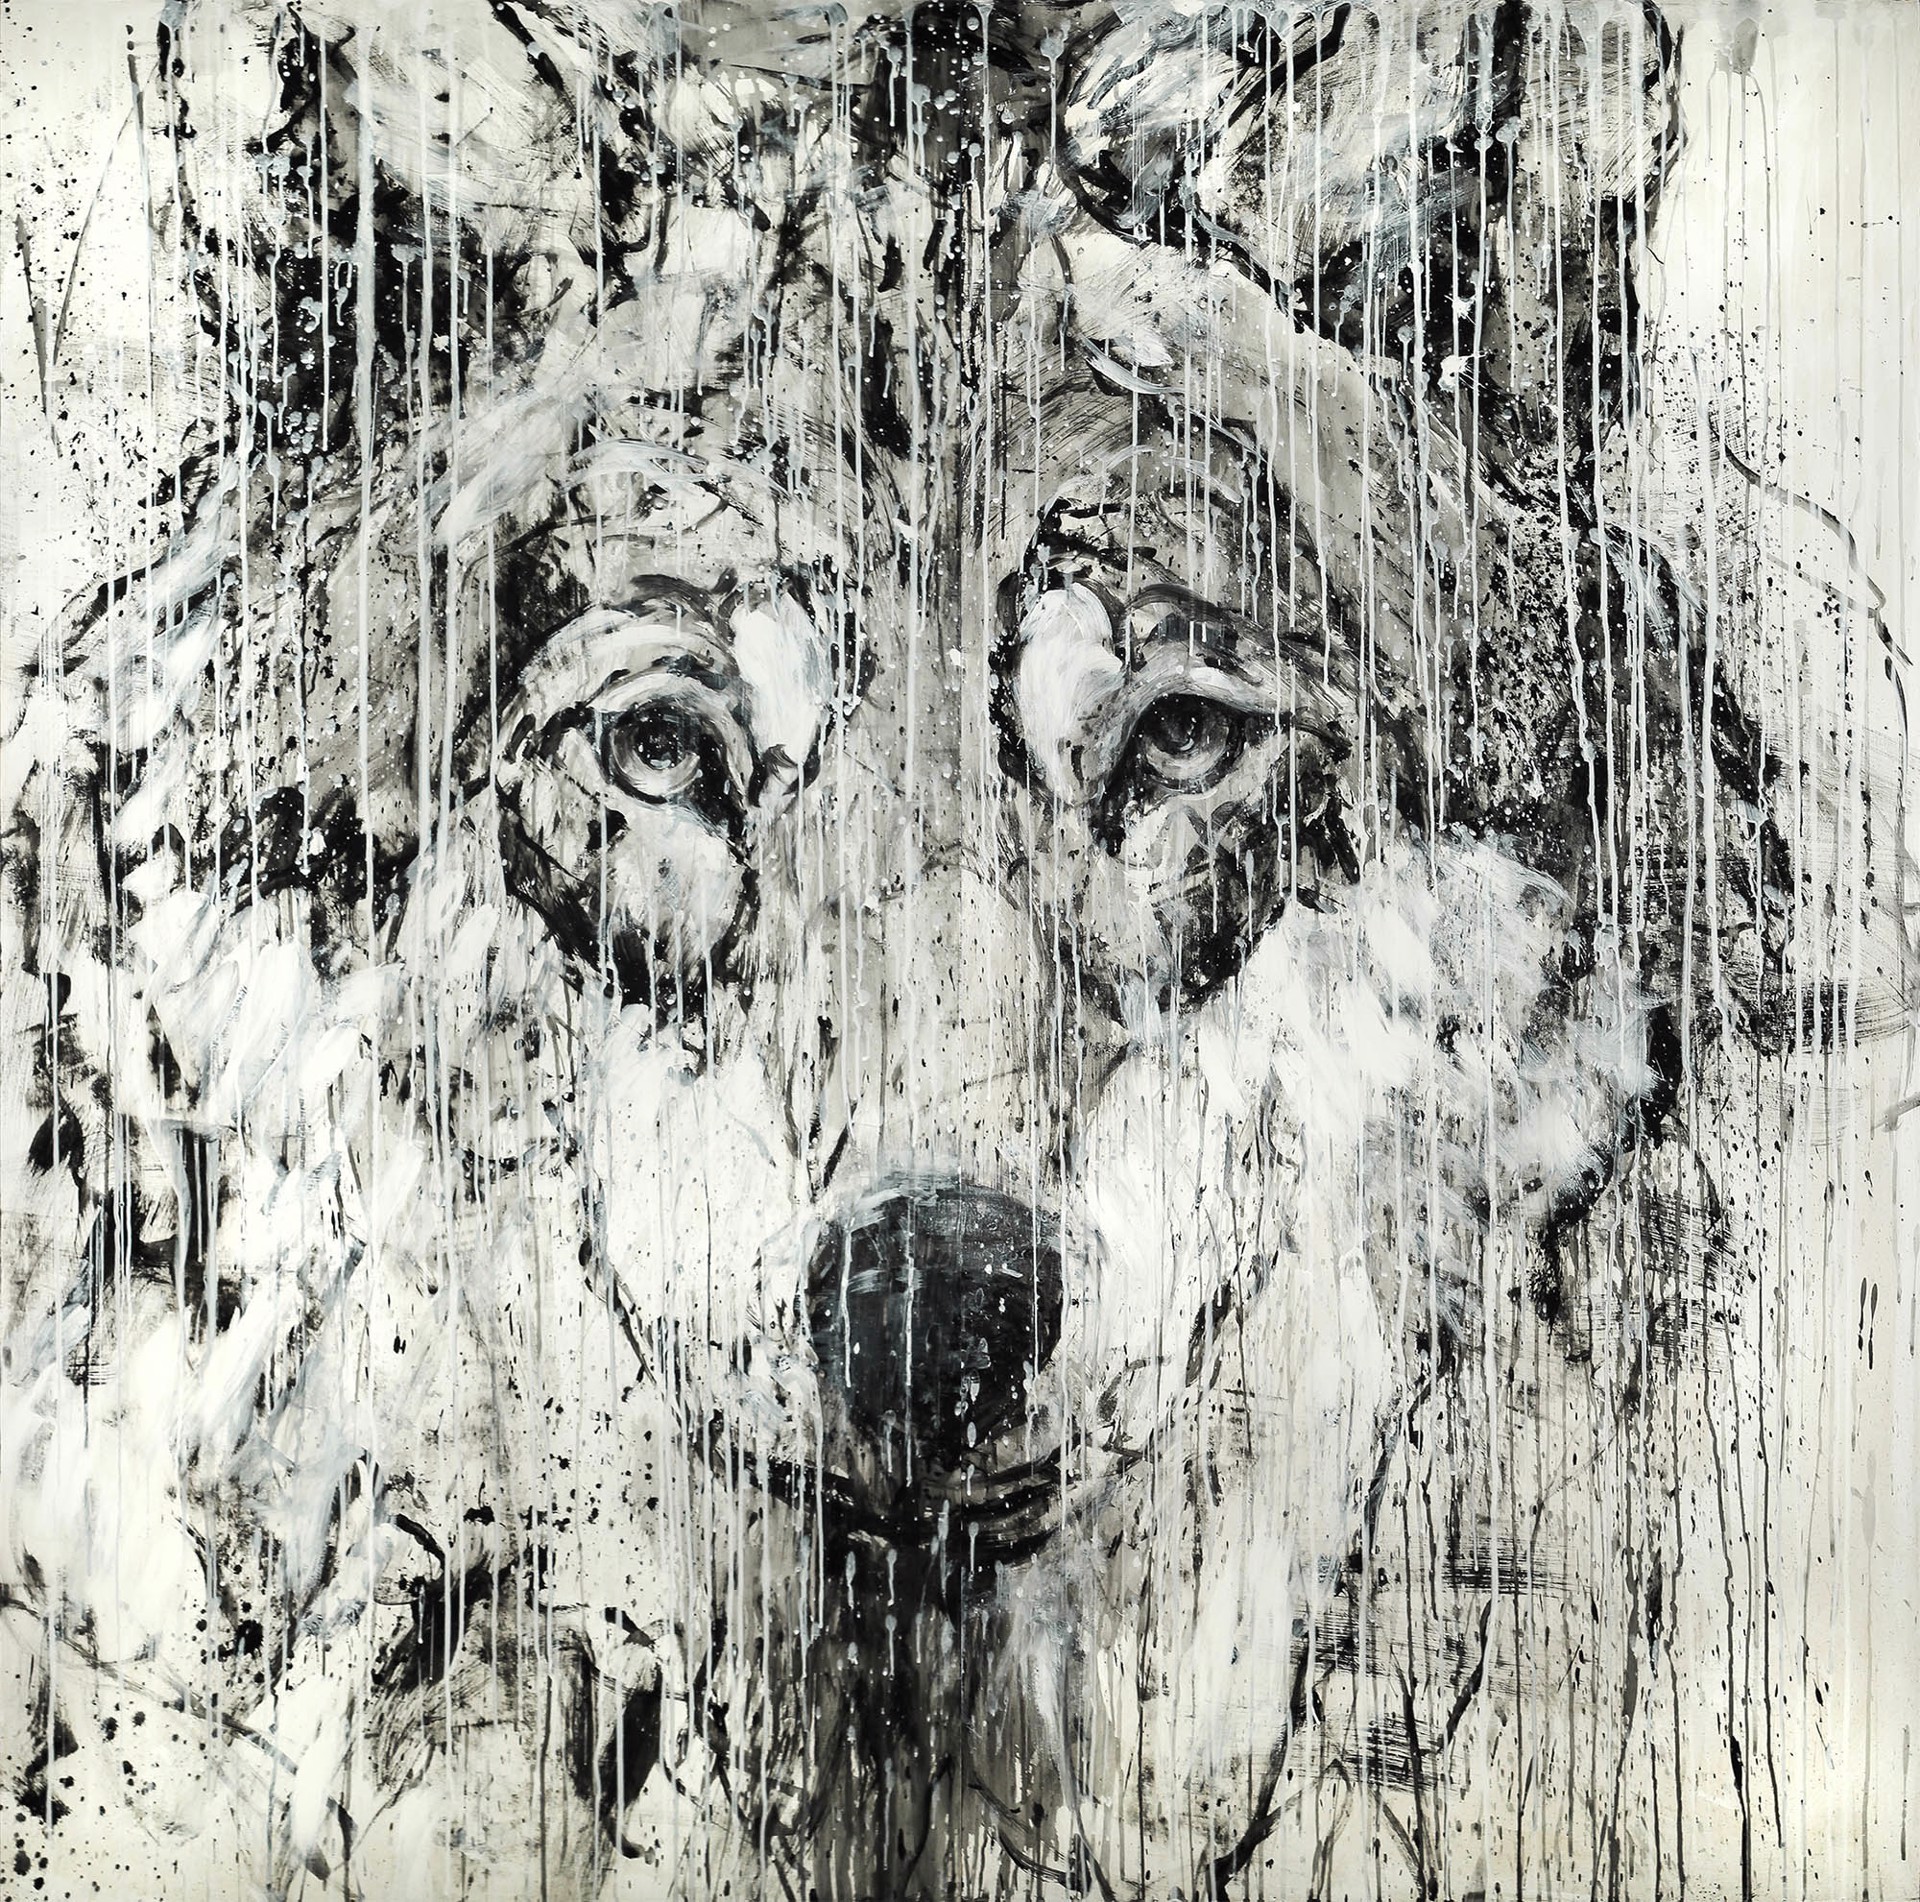 A Contemporary Painting Of A Wolf Portrait In Black And White, Diptych By Matt Flint